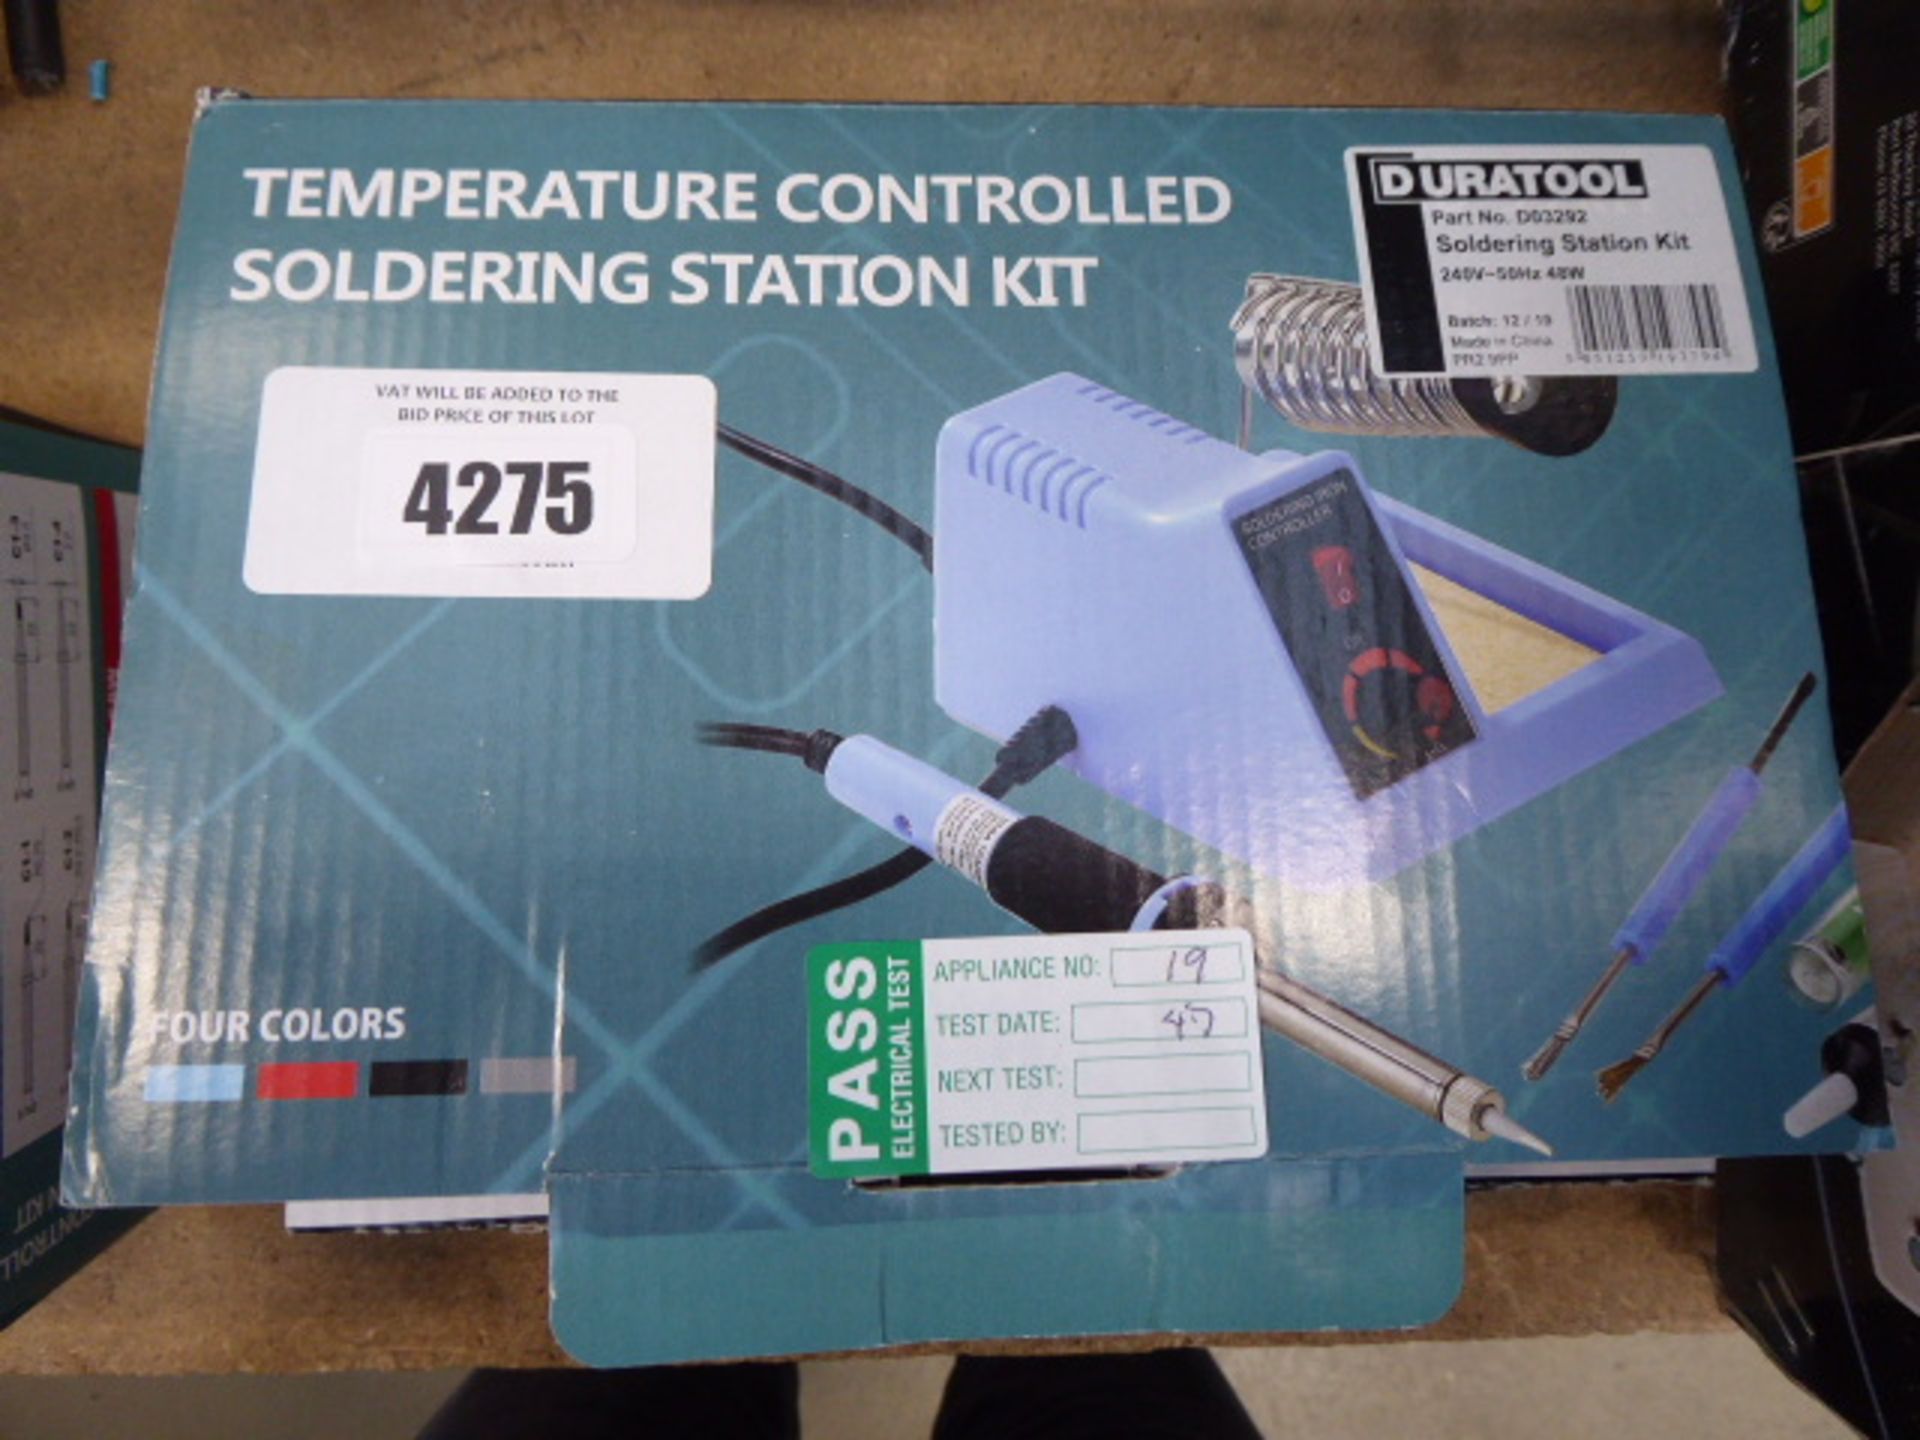 Temperature controlled soldering station kit